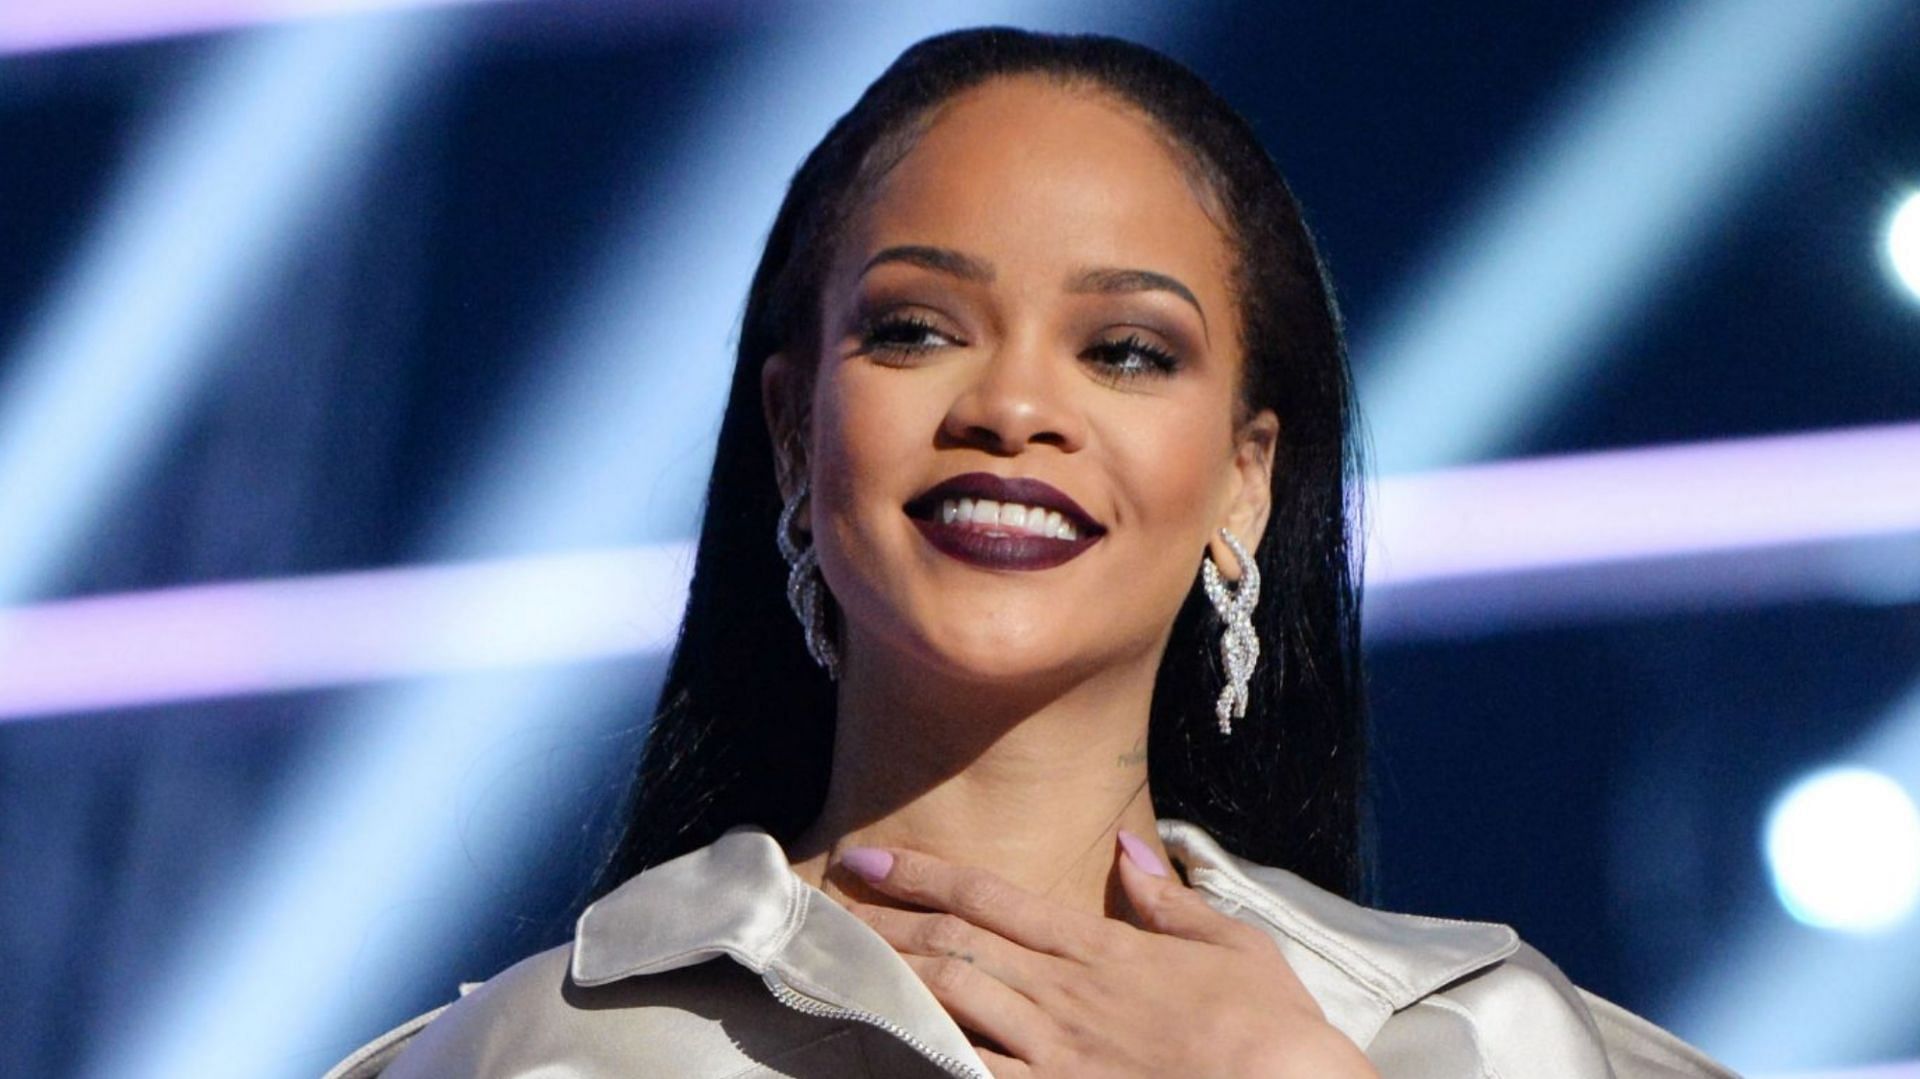 Rihanna is slated to release new work after 2016. (Image via Getty)